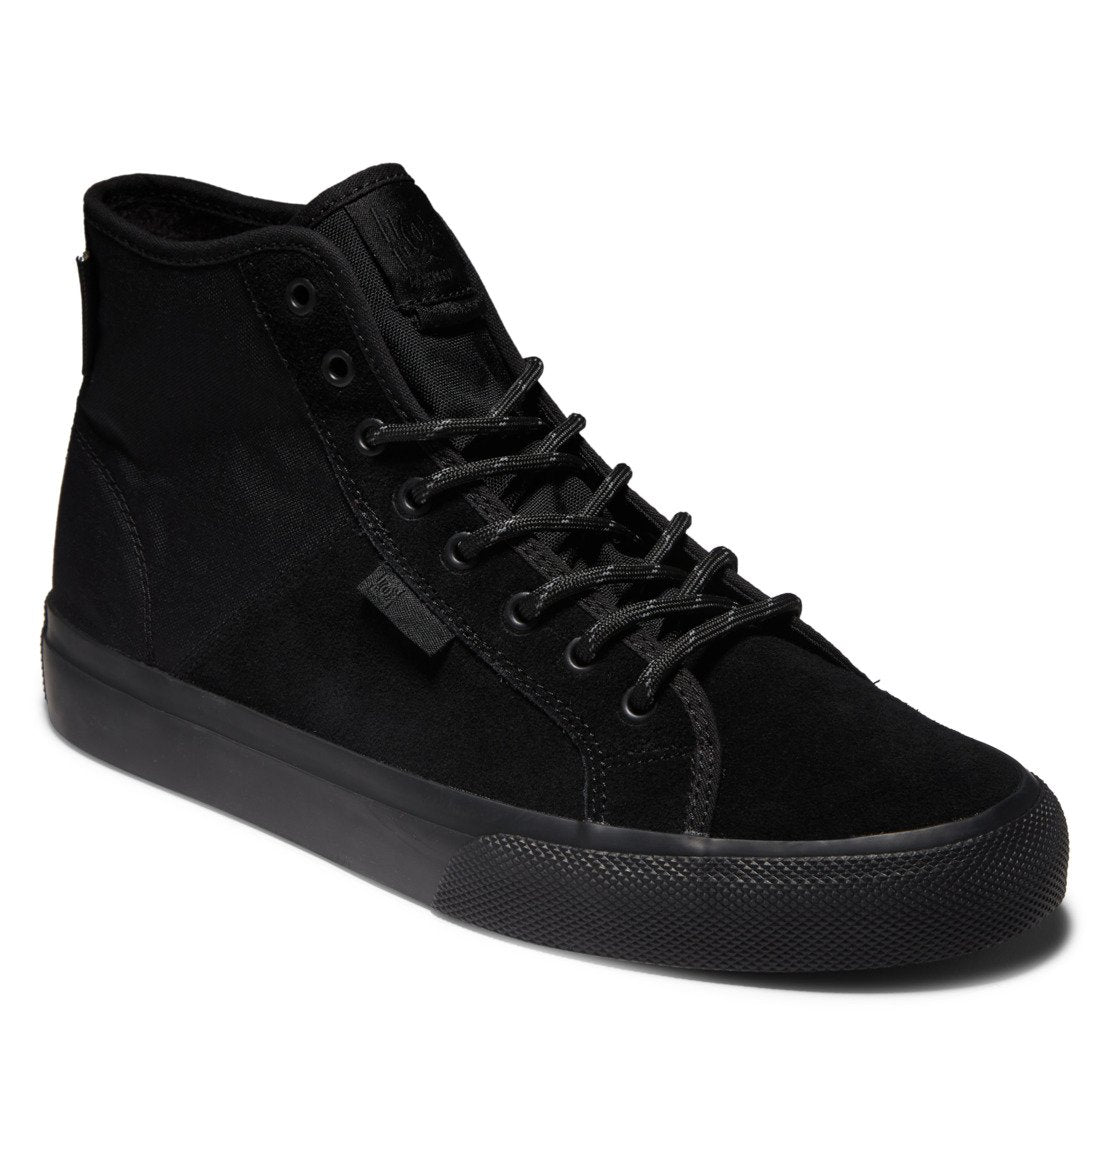 MANUAL HIGH-TOP WINTER SHOES